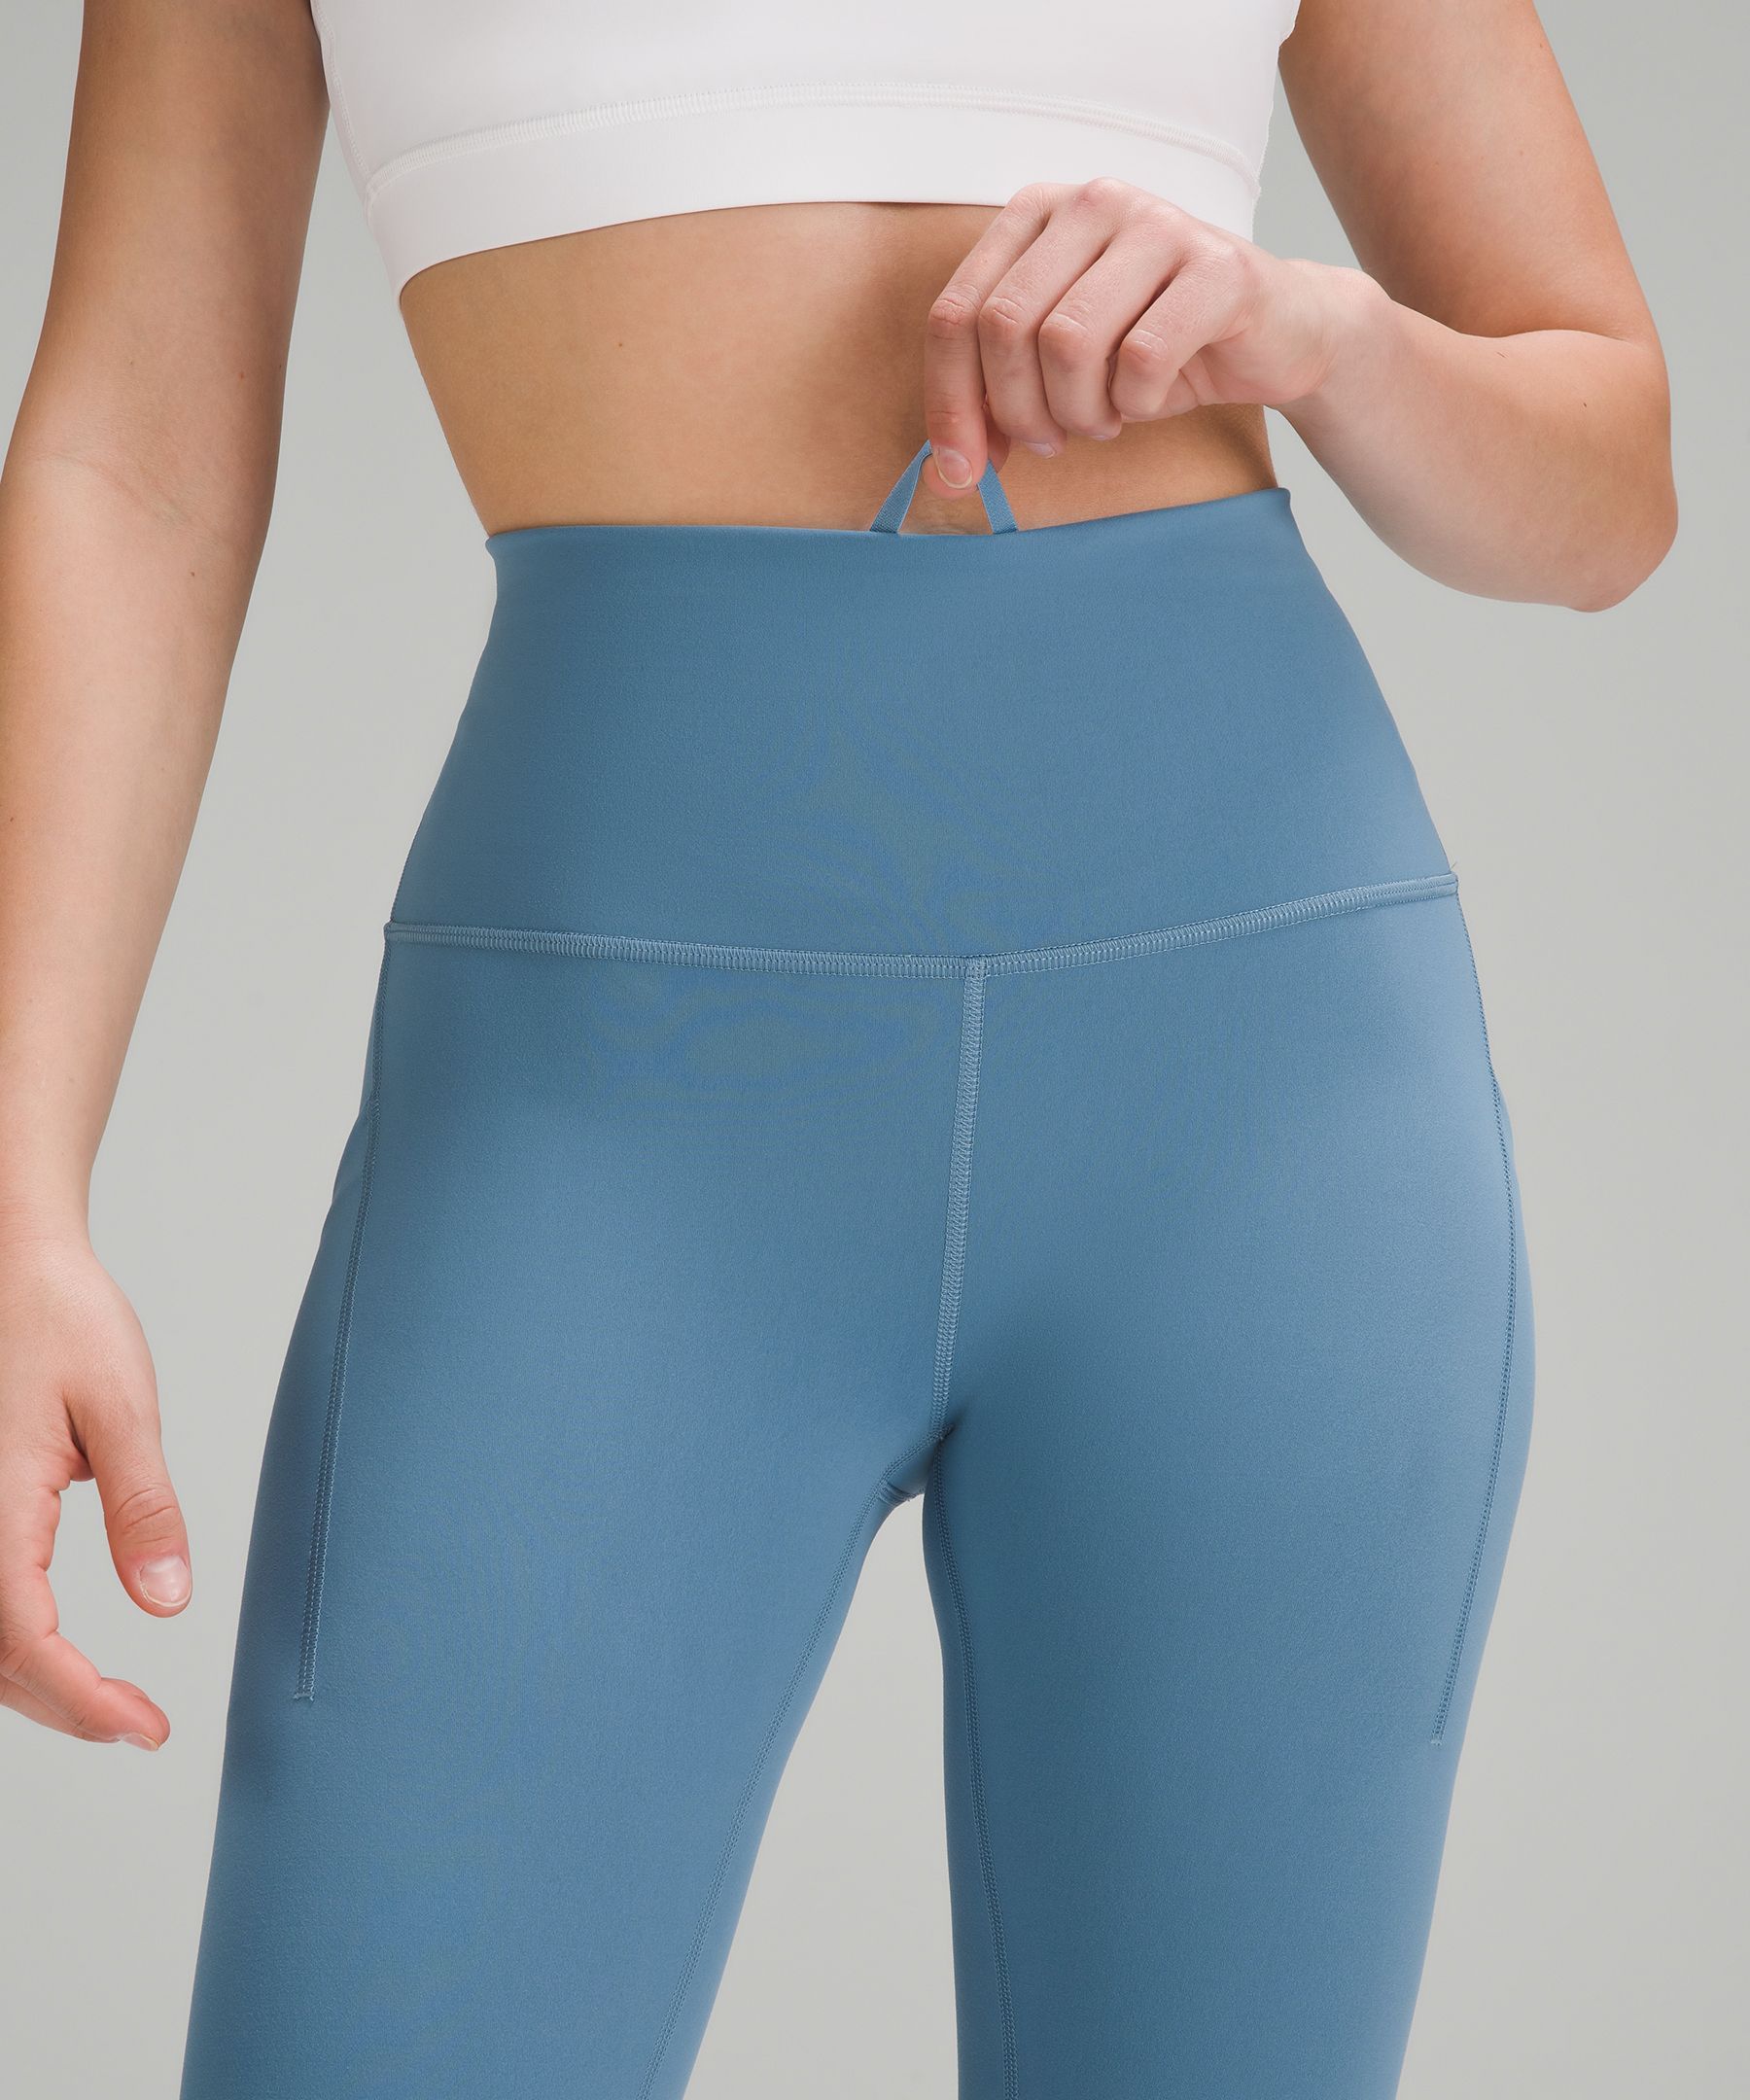 Lululemon Wunder Train High-Rise Tight with Pockets 25". 4